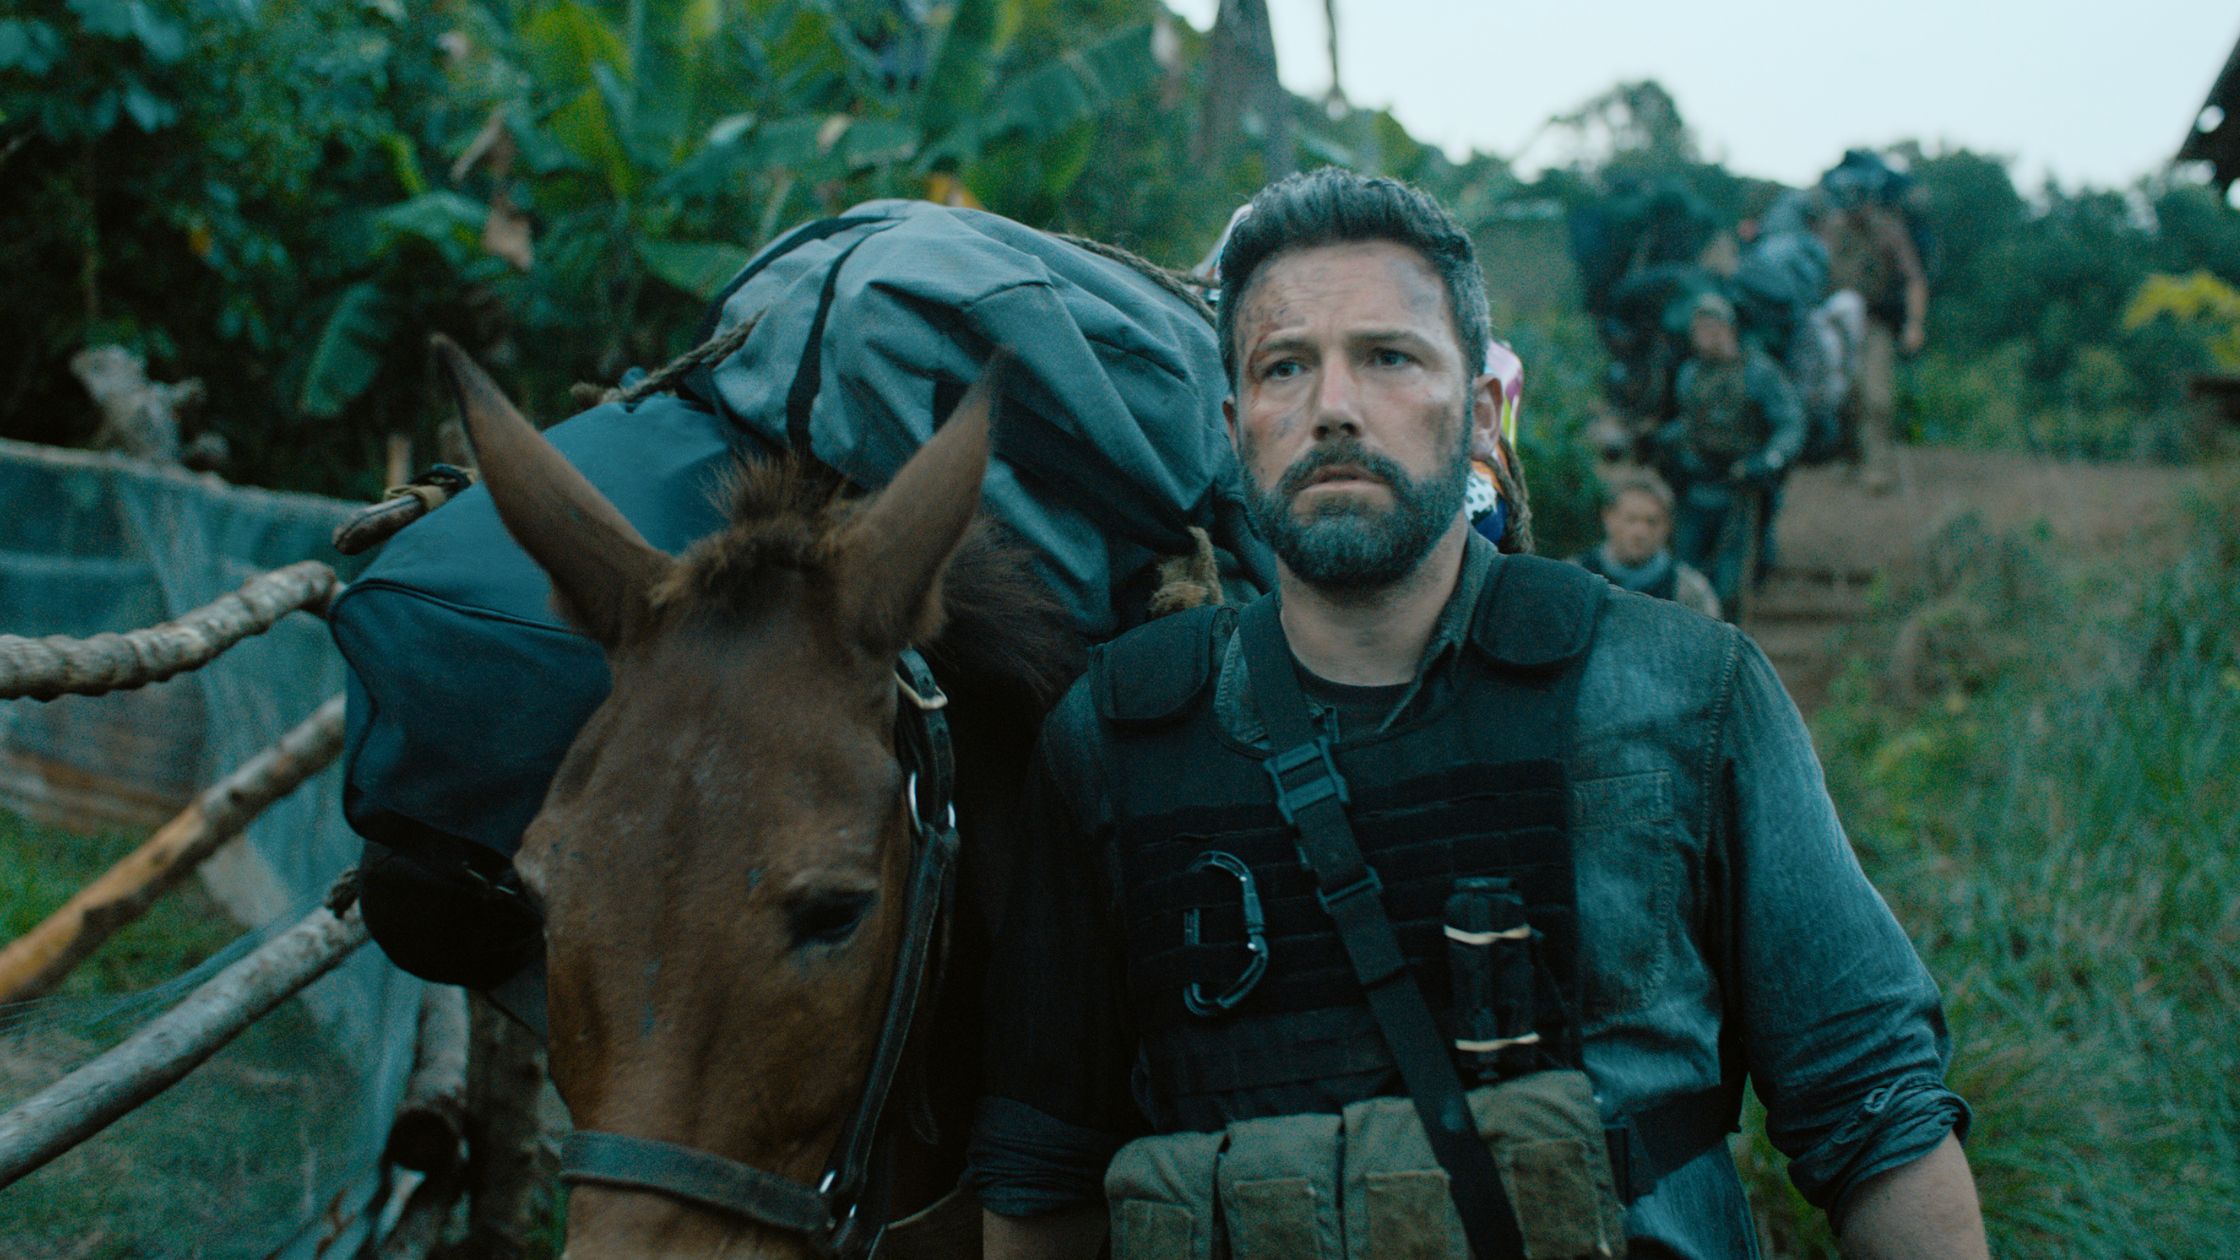 A scene from the film Triple Frontier